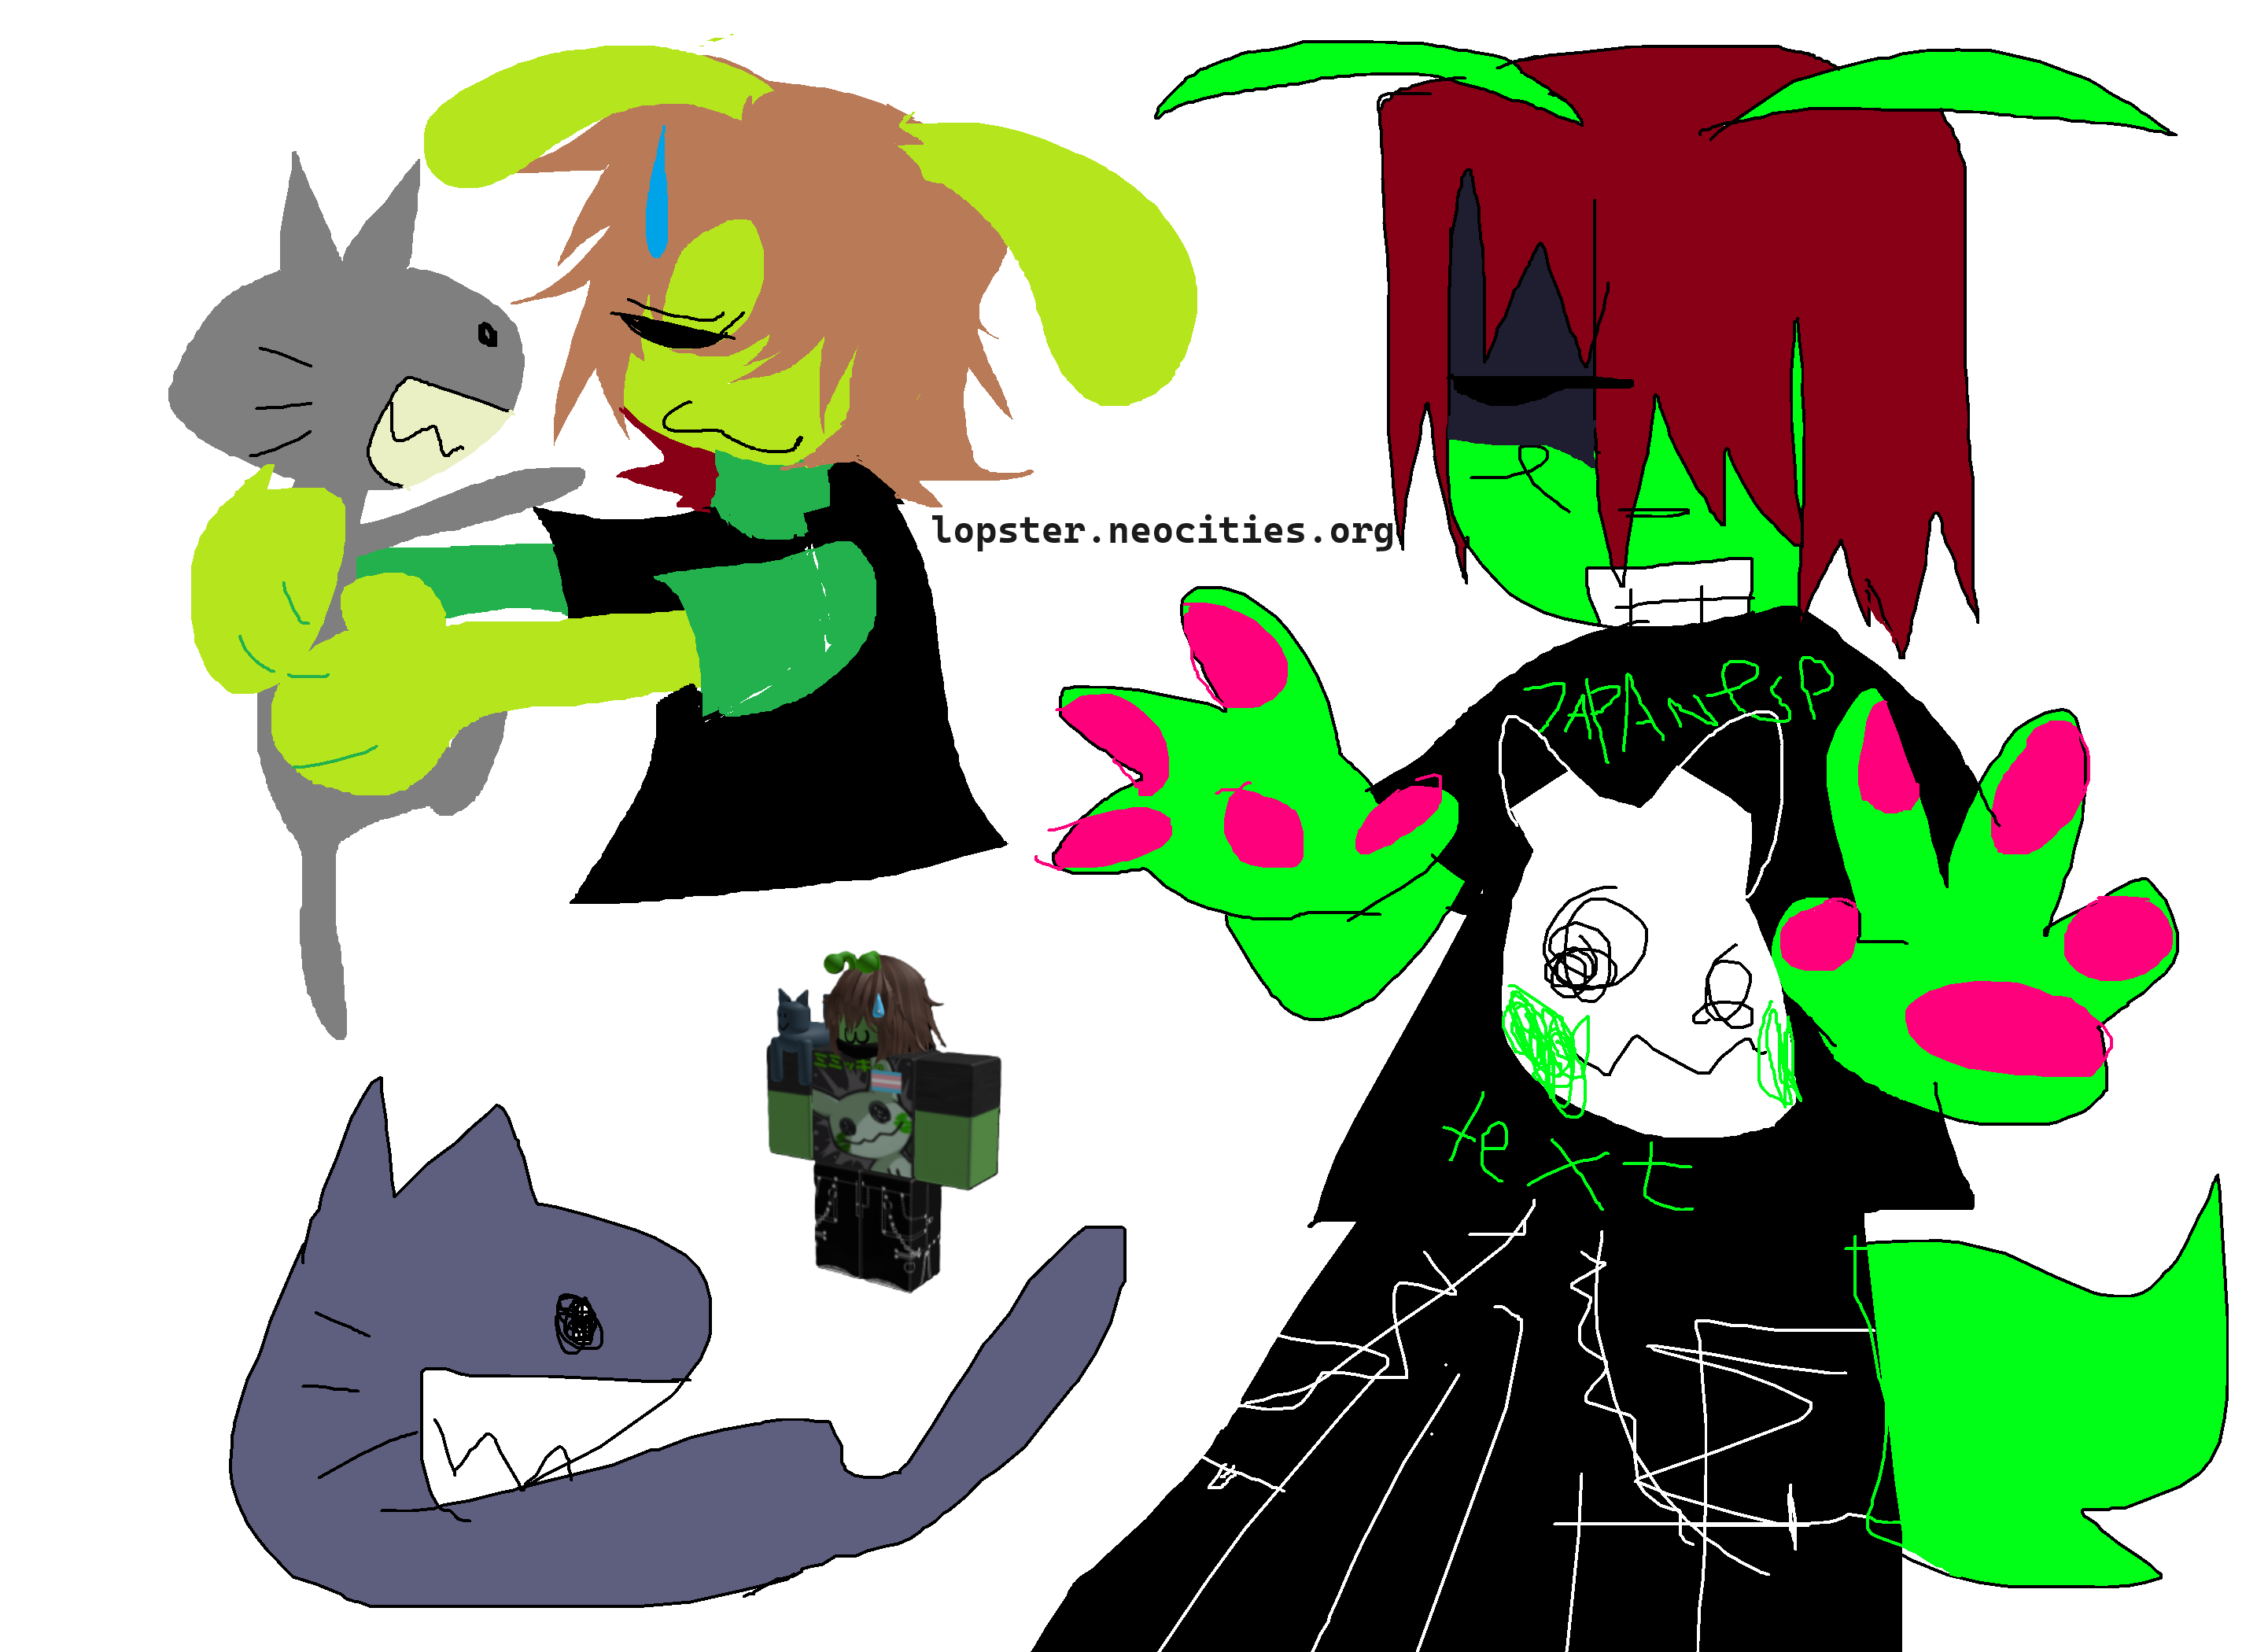 A variety of drawings in mspaint, with the largest on the right featuring a neon green humanoid with a furry tail and antennae. They have bright pink paw pads and wear tripp pants. The same character is drawn in a lineless style on the left, where they are holding a cat. This drawings  color palette is significantly lighter and less saturated. Below this is another drawing of a cat next to a roblox avatar that the green characters are based on.